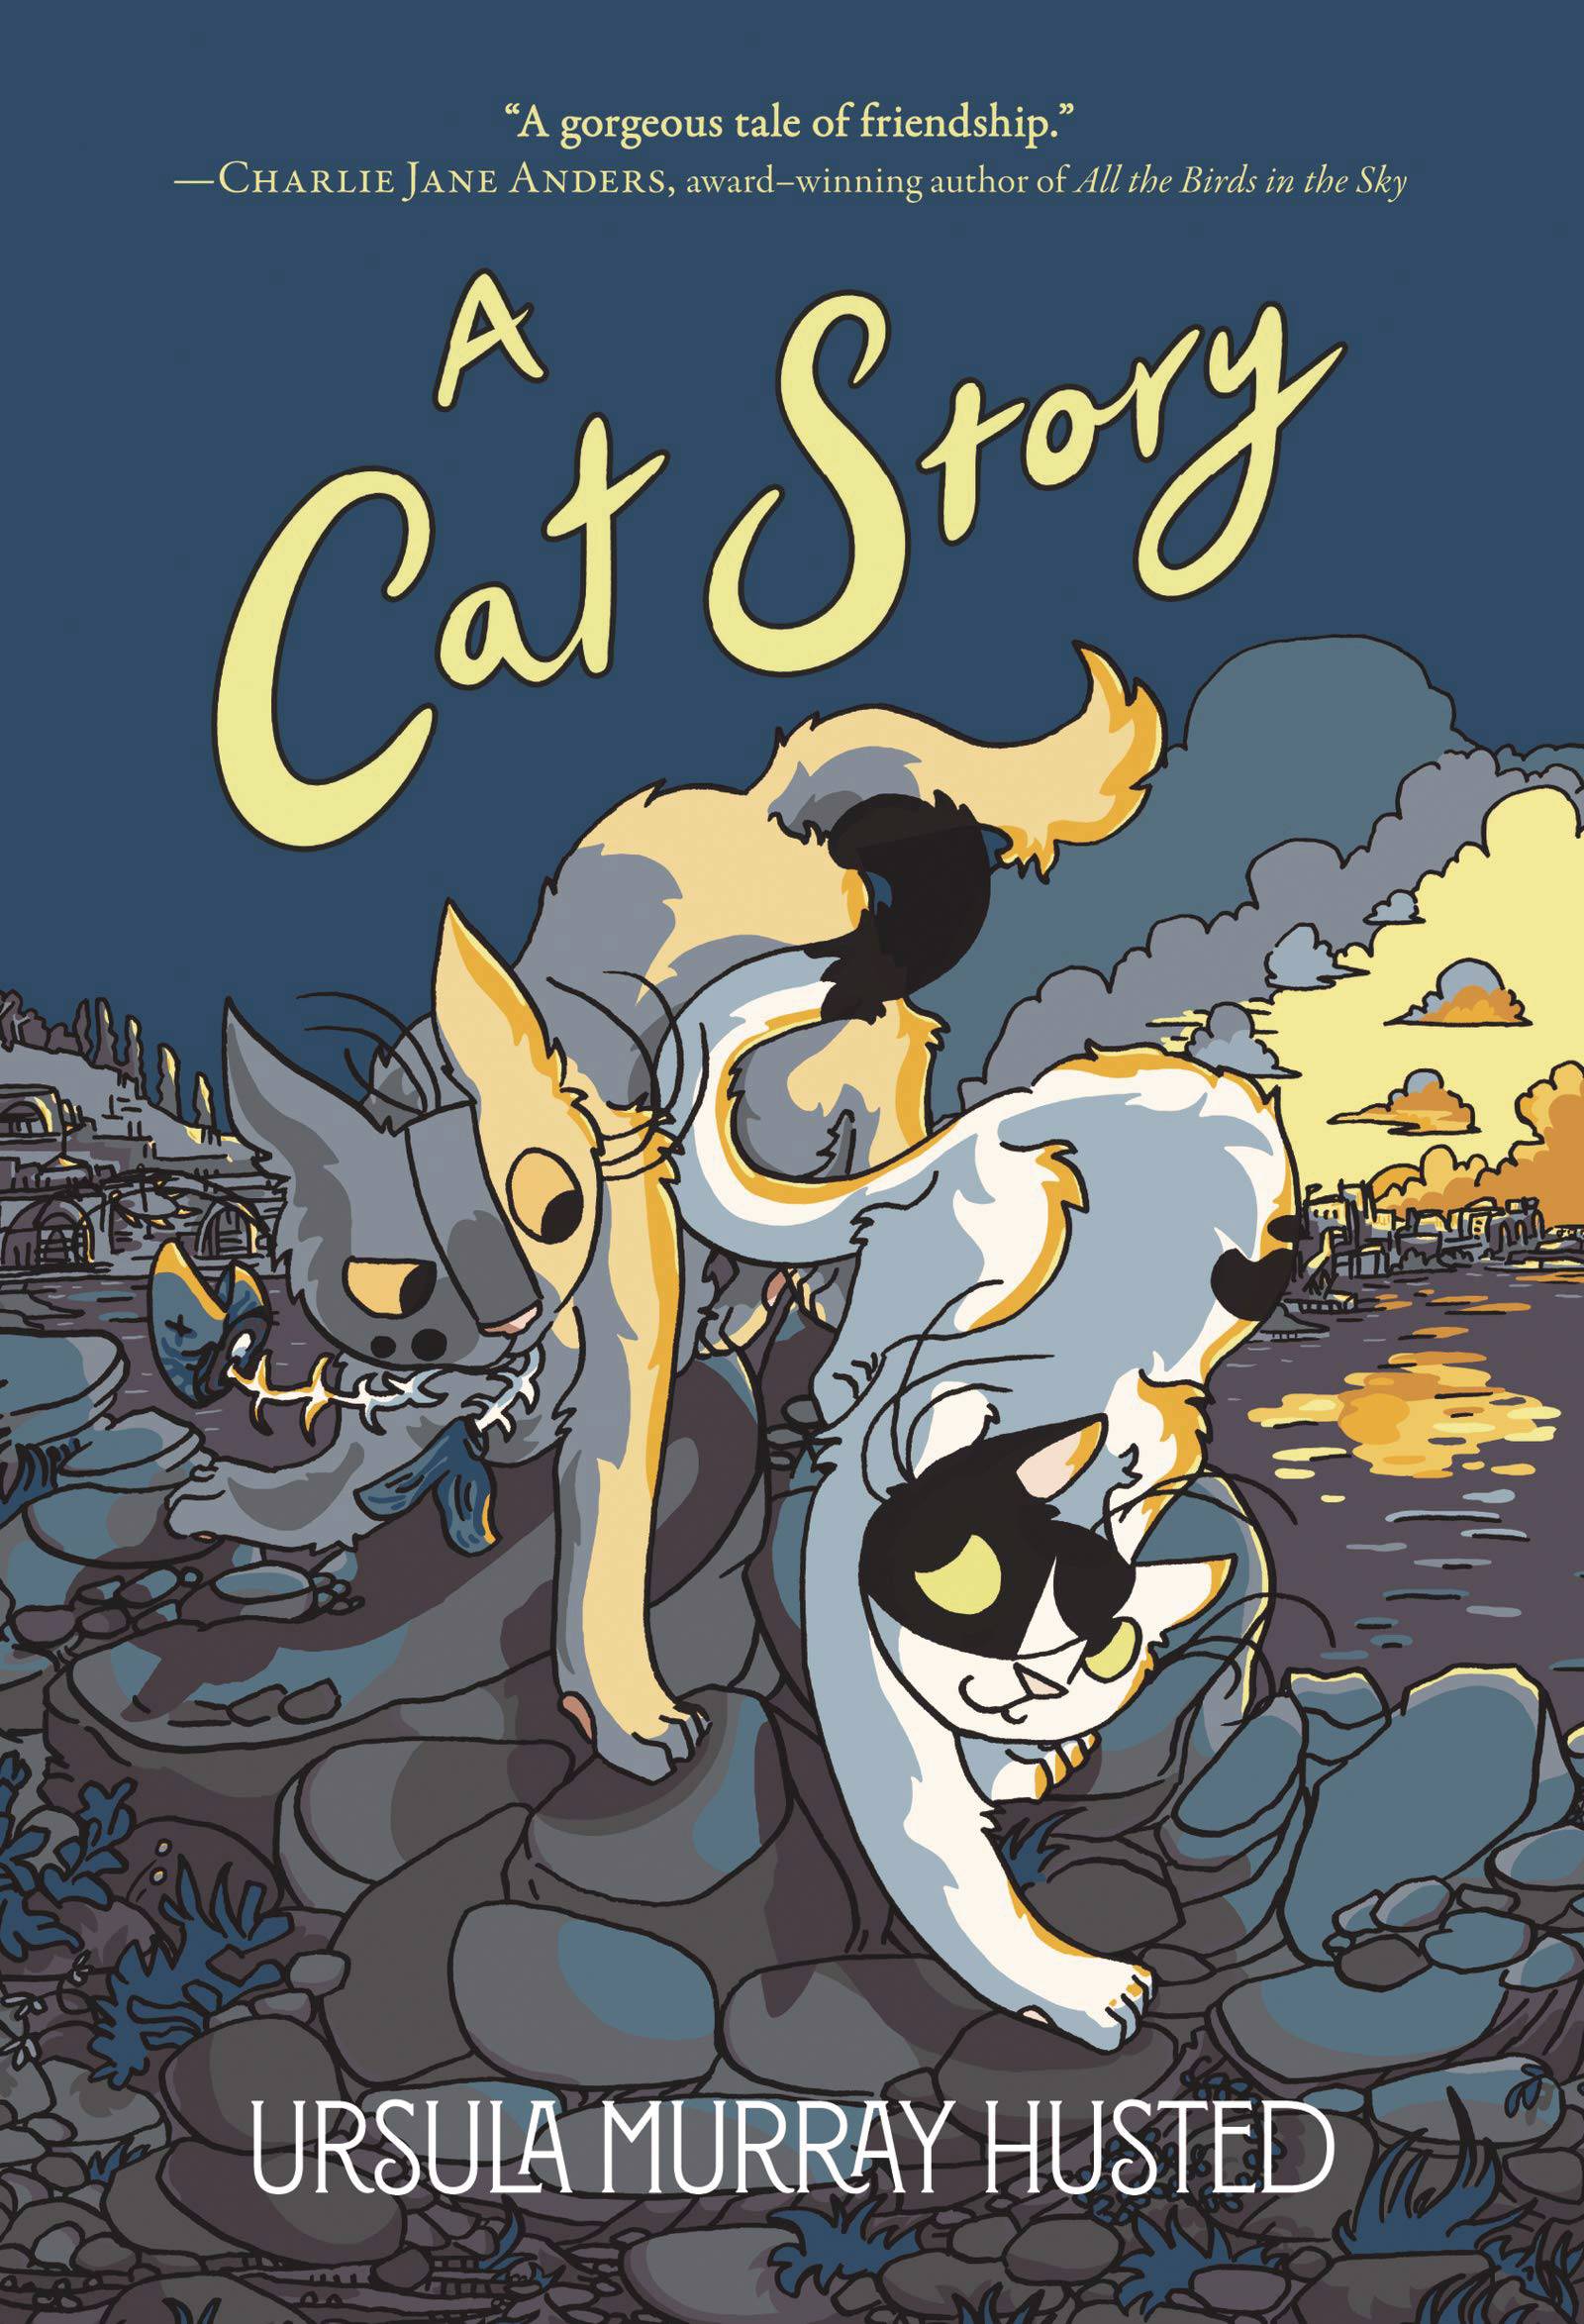 A calico cat smiles back at a confused yellow cat with a fish skeleton in its mouth. They are walking across some rocks beside dark water at night. The cats are lit by a city on the other side of the water.